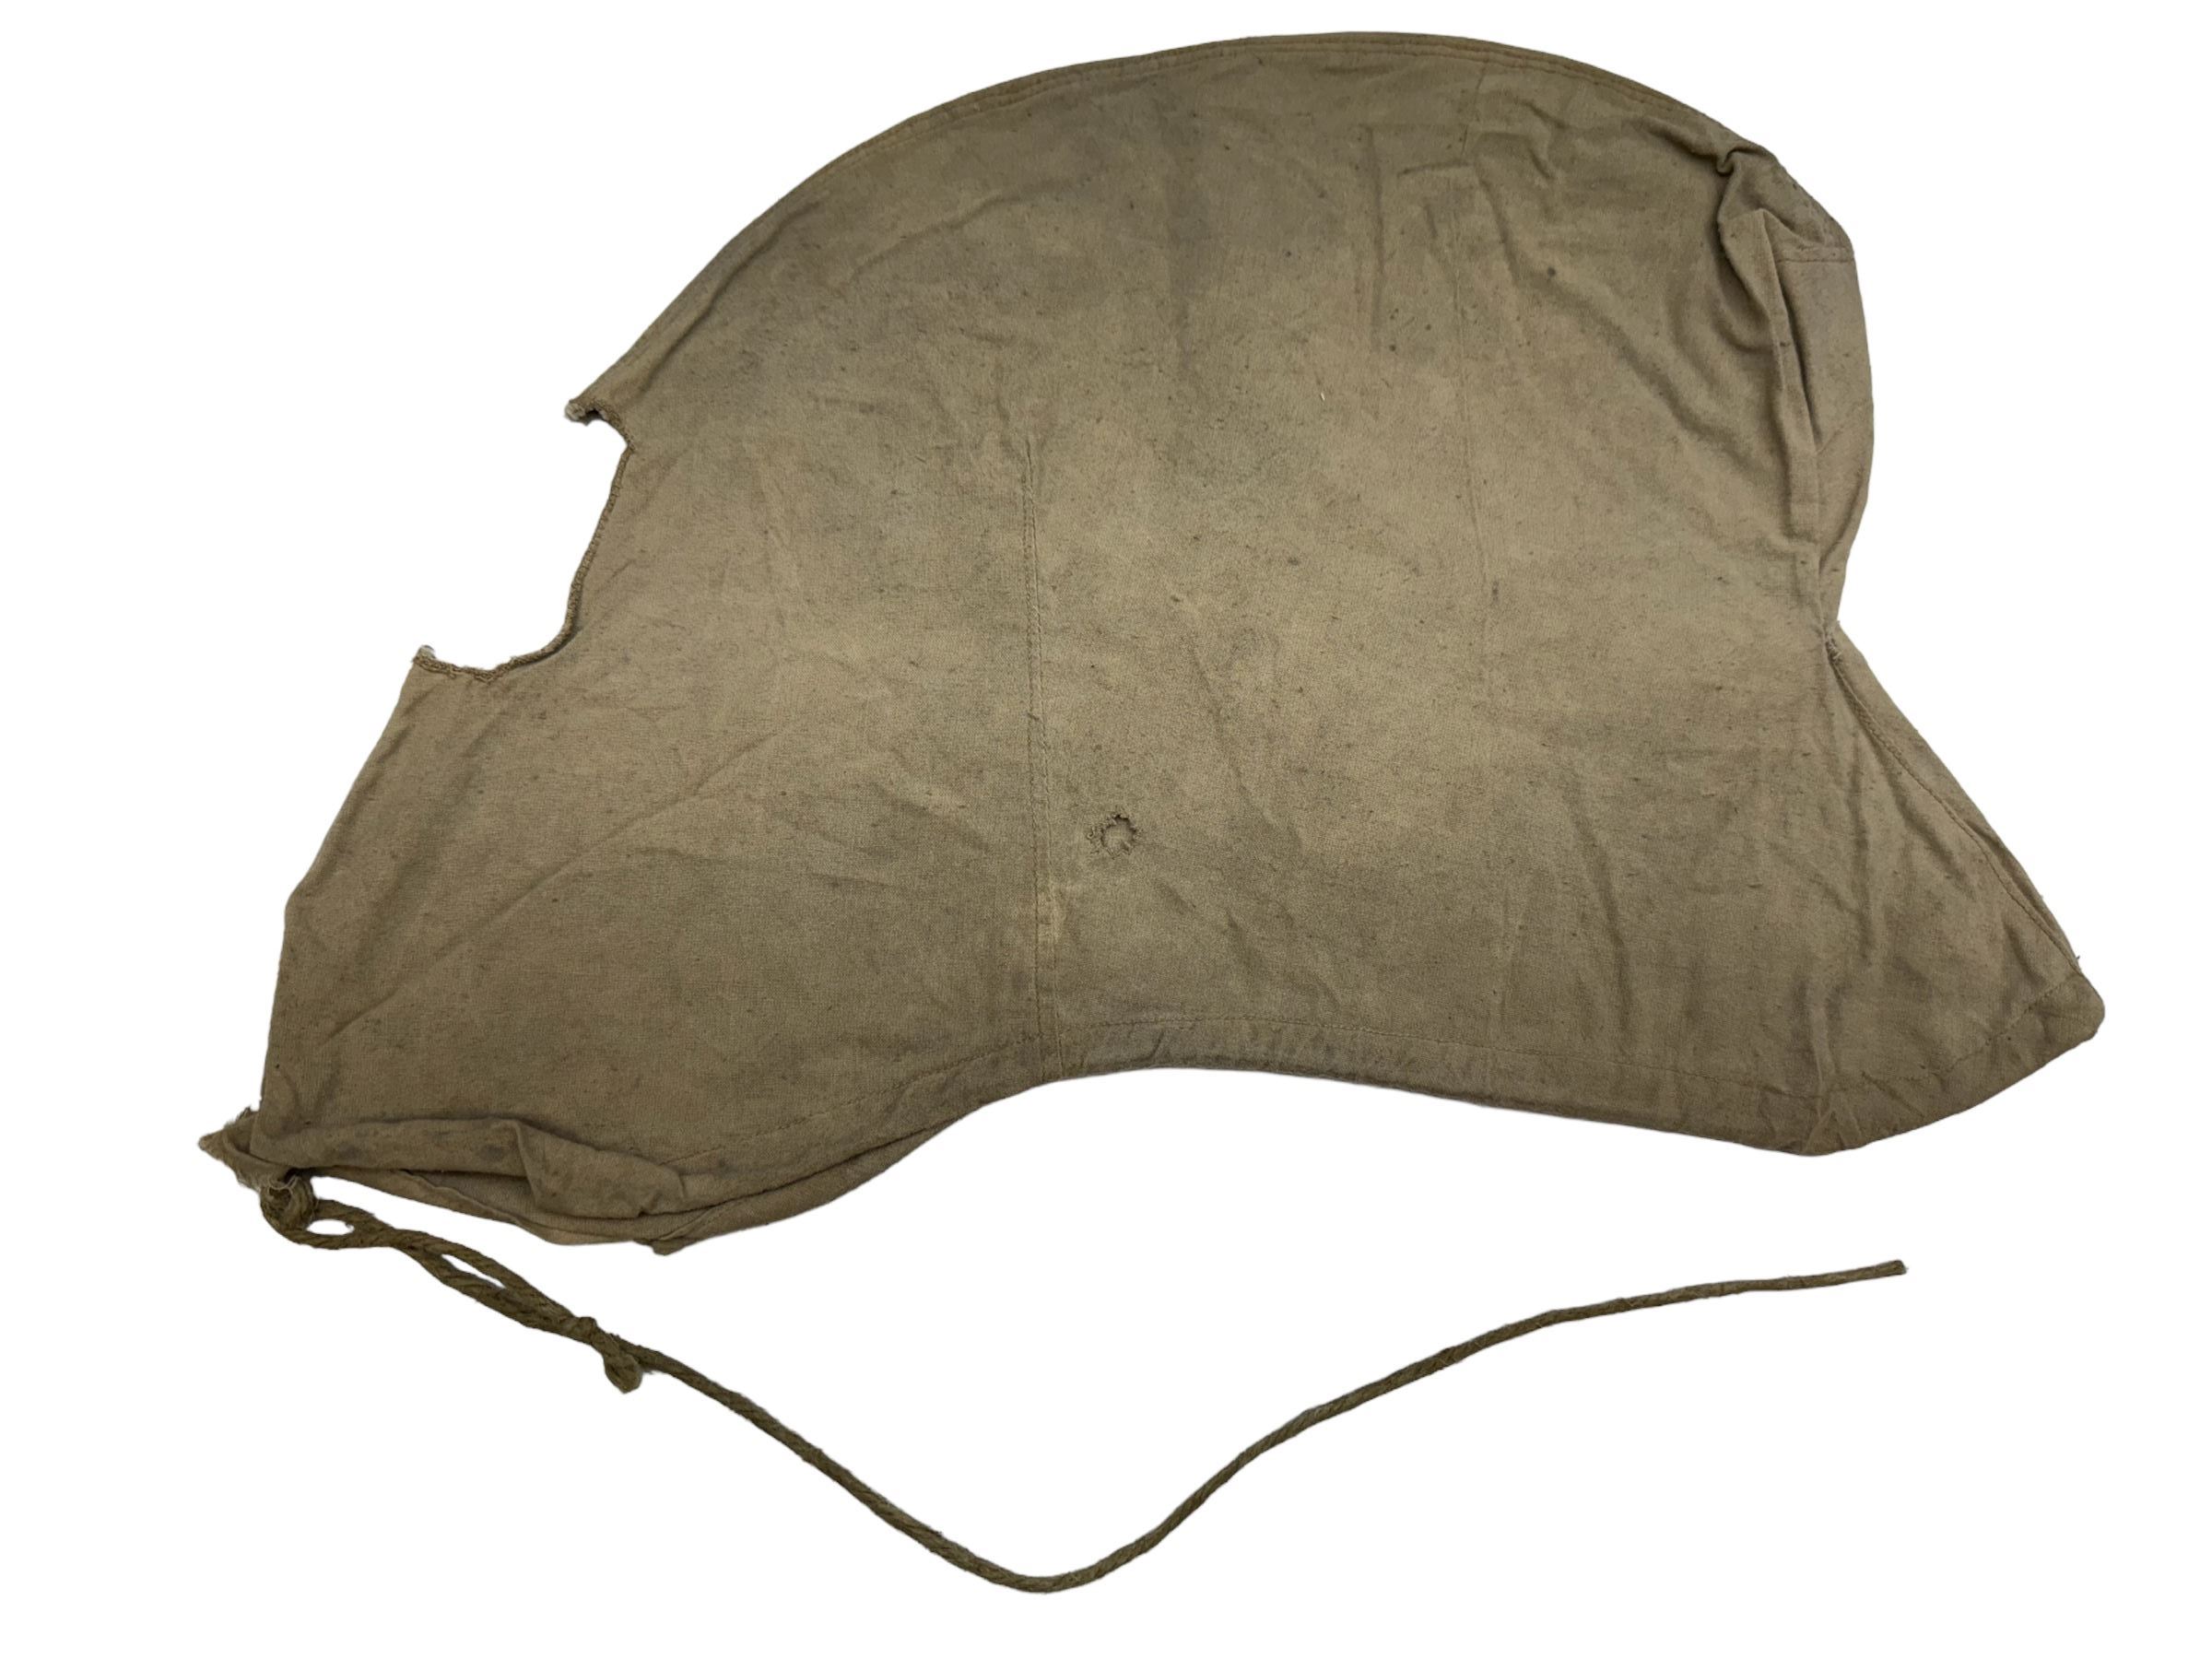 WWI French Dragoon Troopers Helmet Cover - Image 2 of 4